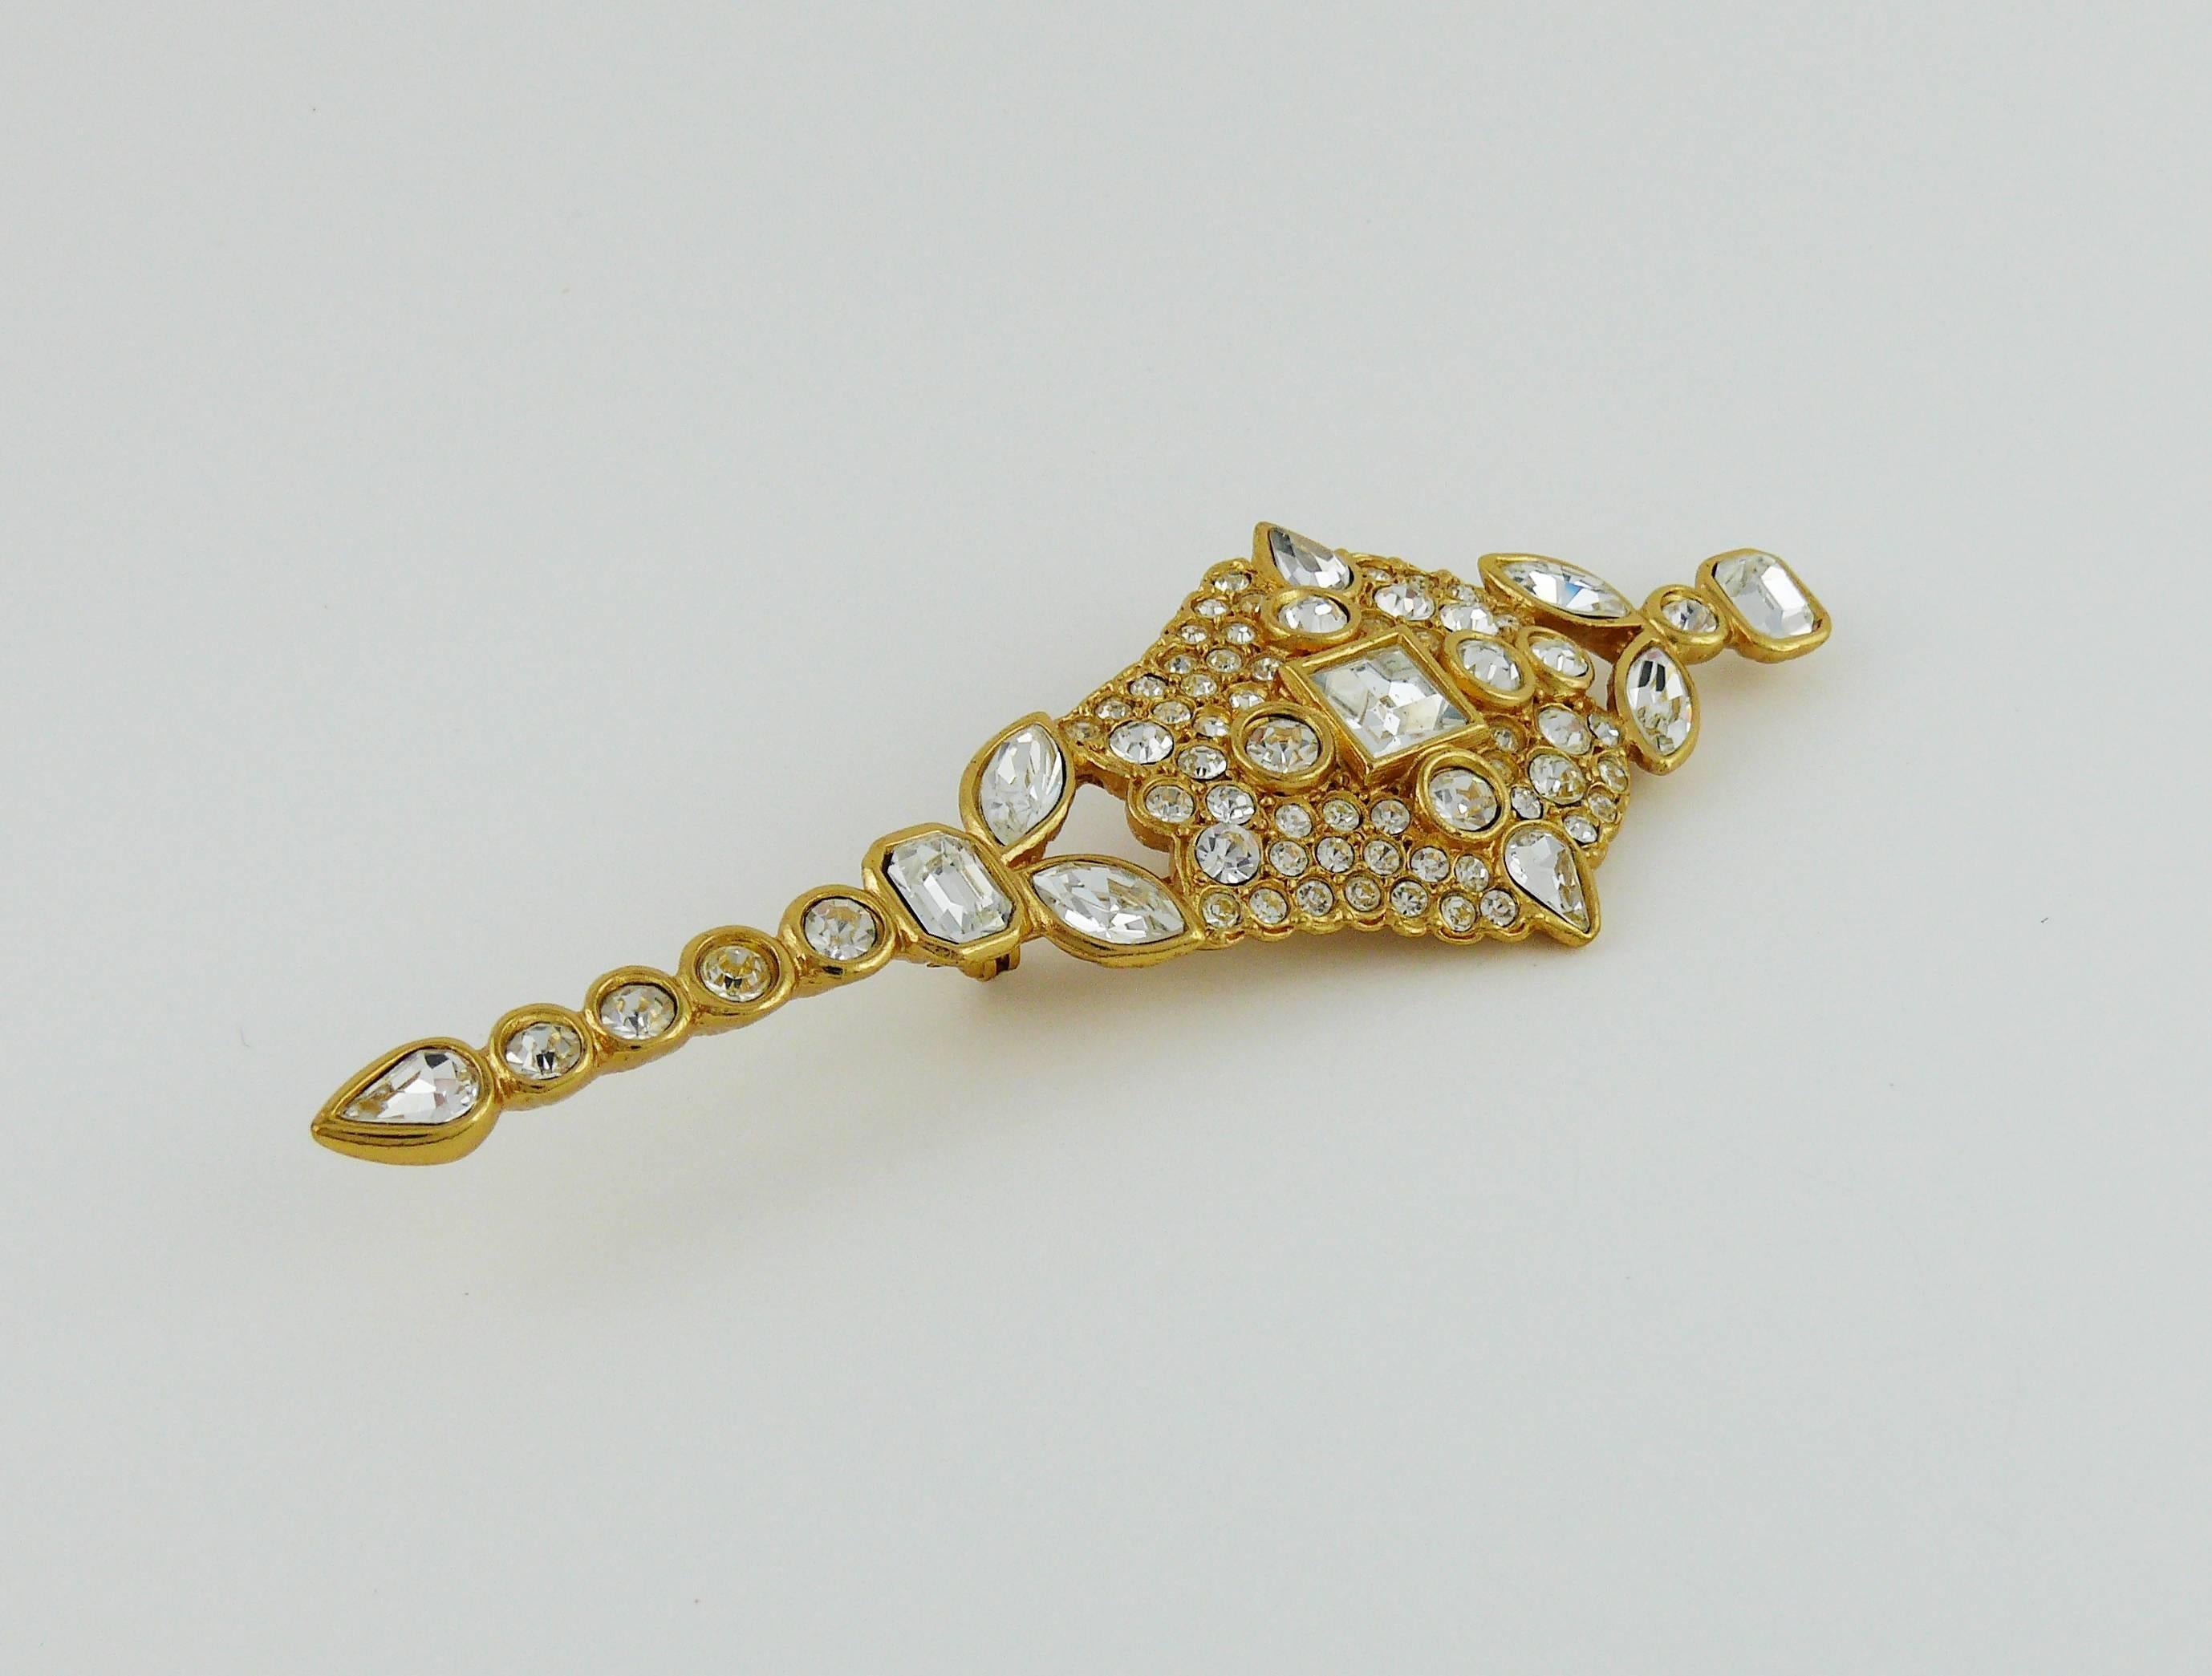 YVES SAINT LAURENT vintage massive gold tone diamante brooch.

Marked YSL Made in France.

JEWELRY CONDITION CHART
- New or never worn : item is in pristine condition with no noticeable imperfections
- Excellent : item has been used and may have not